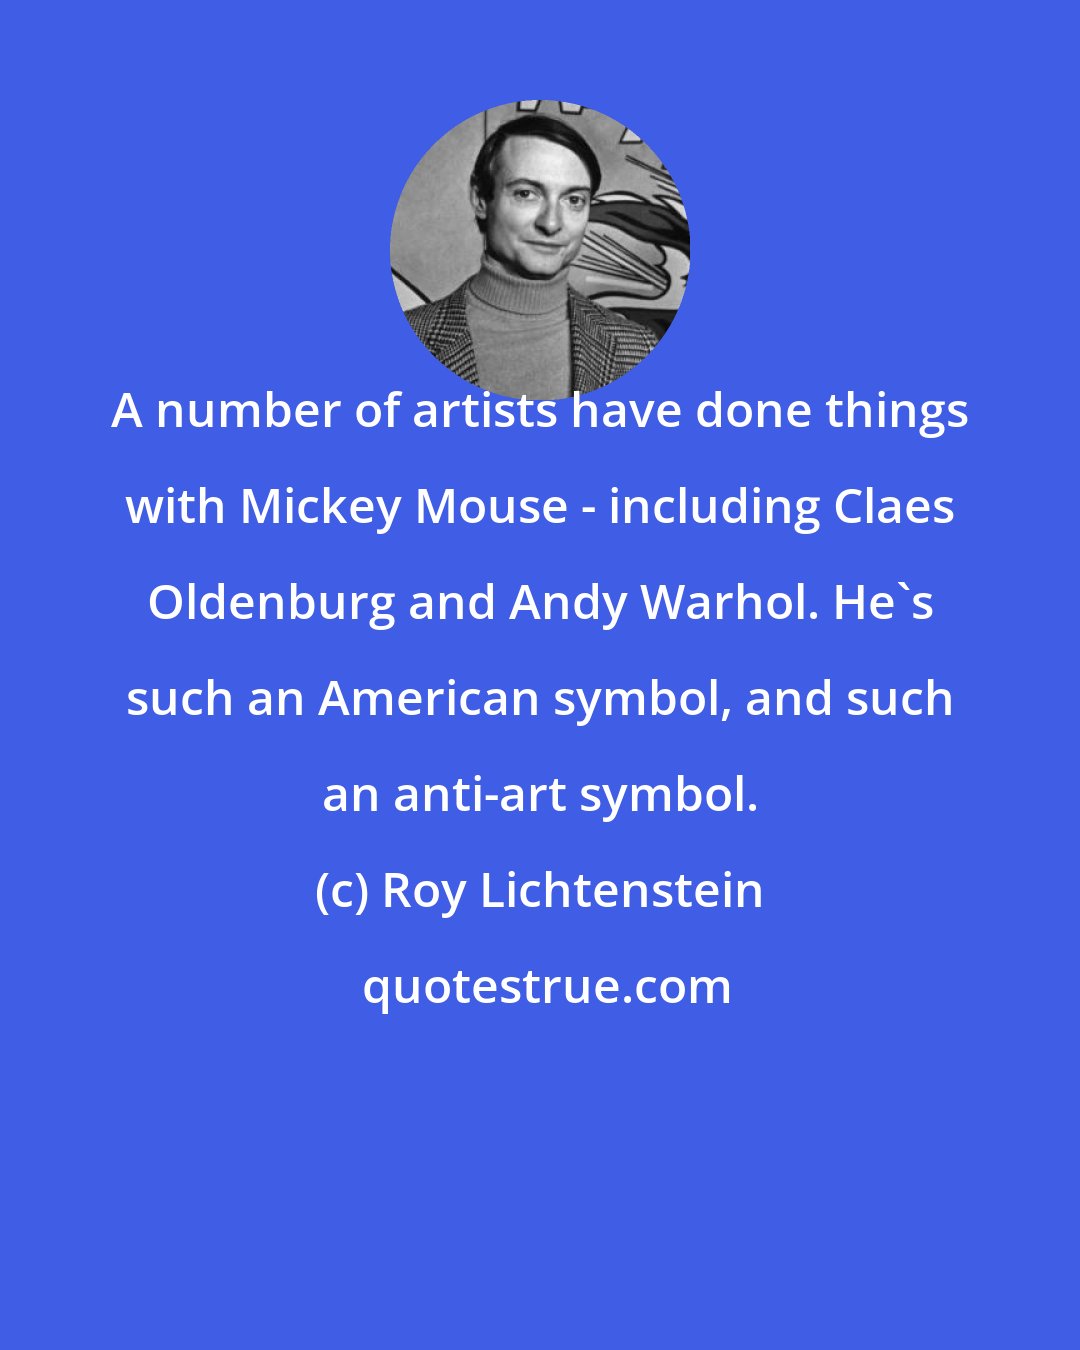 Roy Lichtenstein: A number of artists have done things with Mickey Mouse - including Claes Oldenburg and Andy Warhol. He's such an American symbol, and such an anti-art symbol.